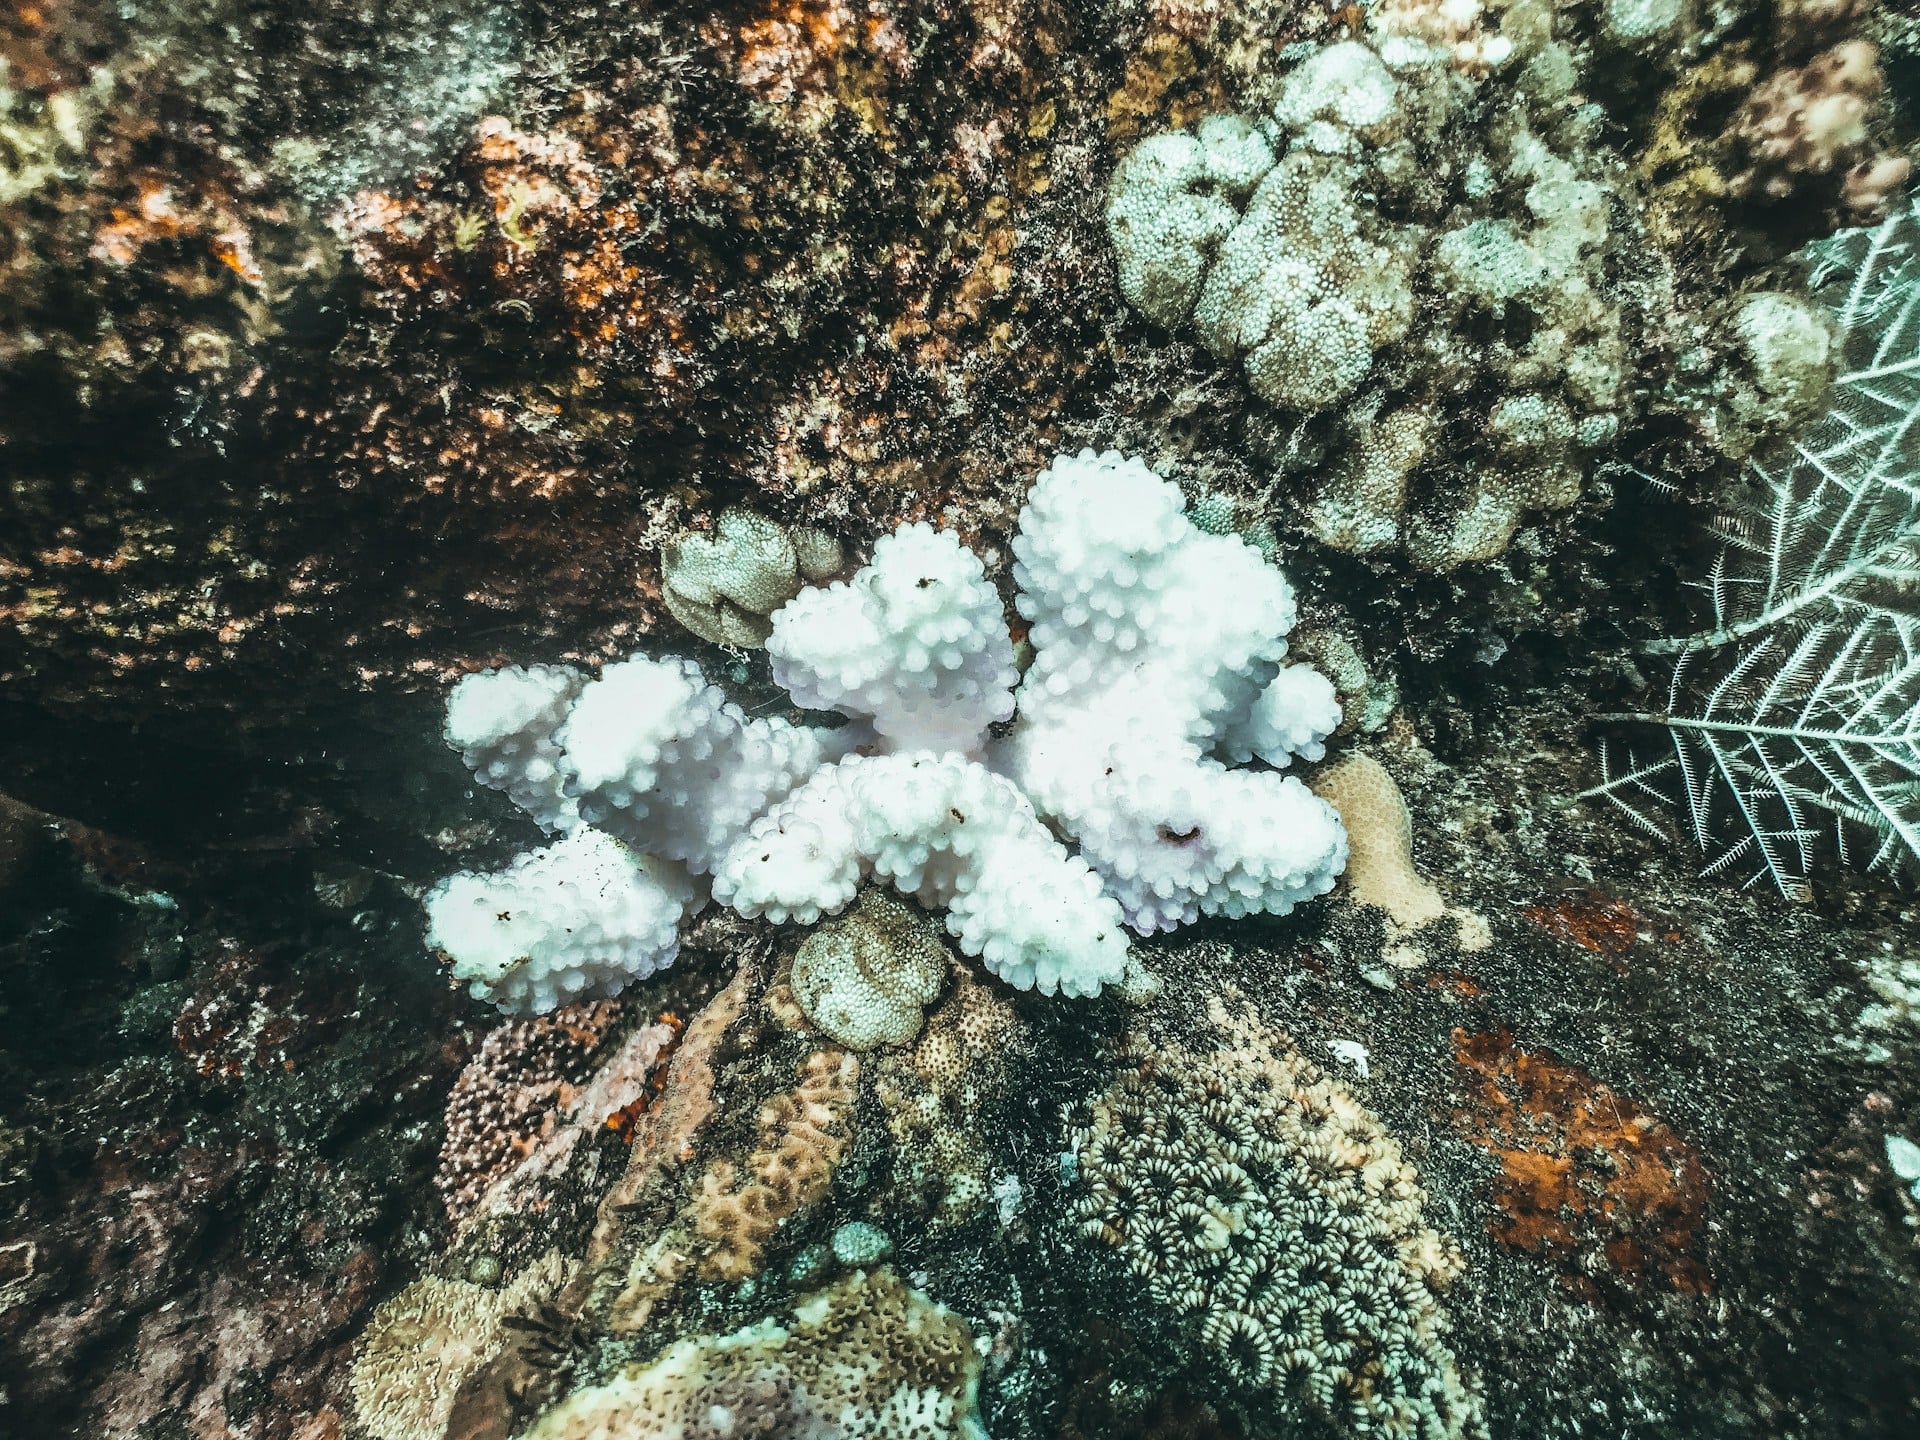 Coral bleaching is a side effect of climate change